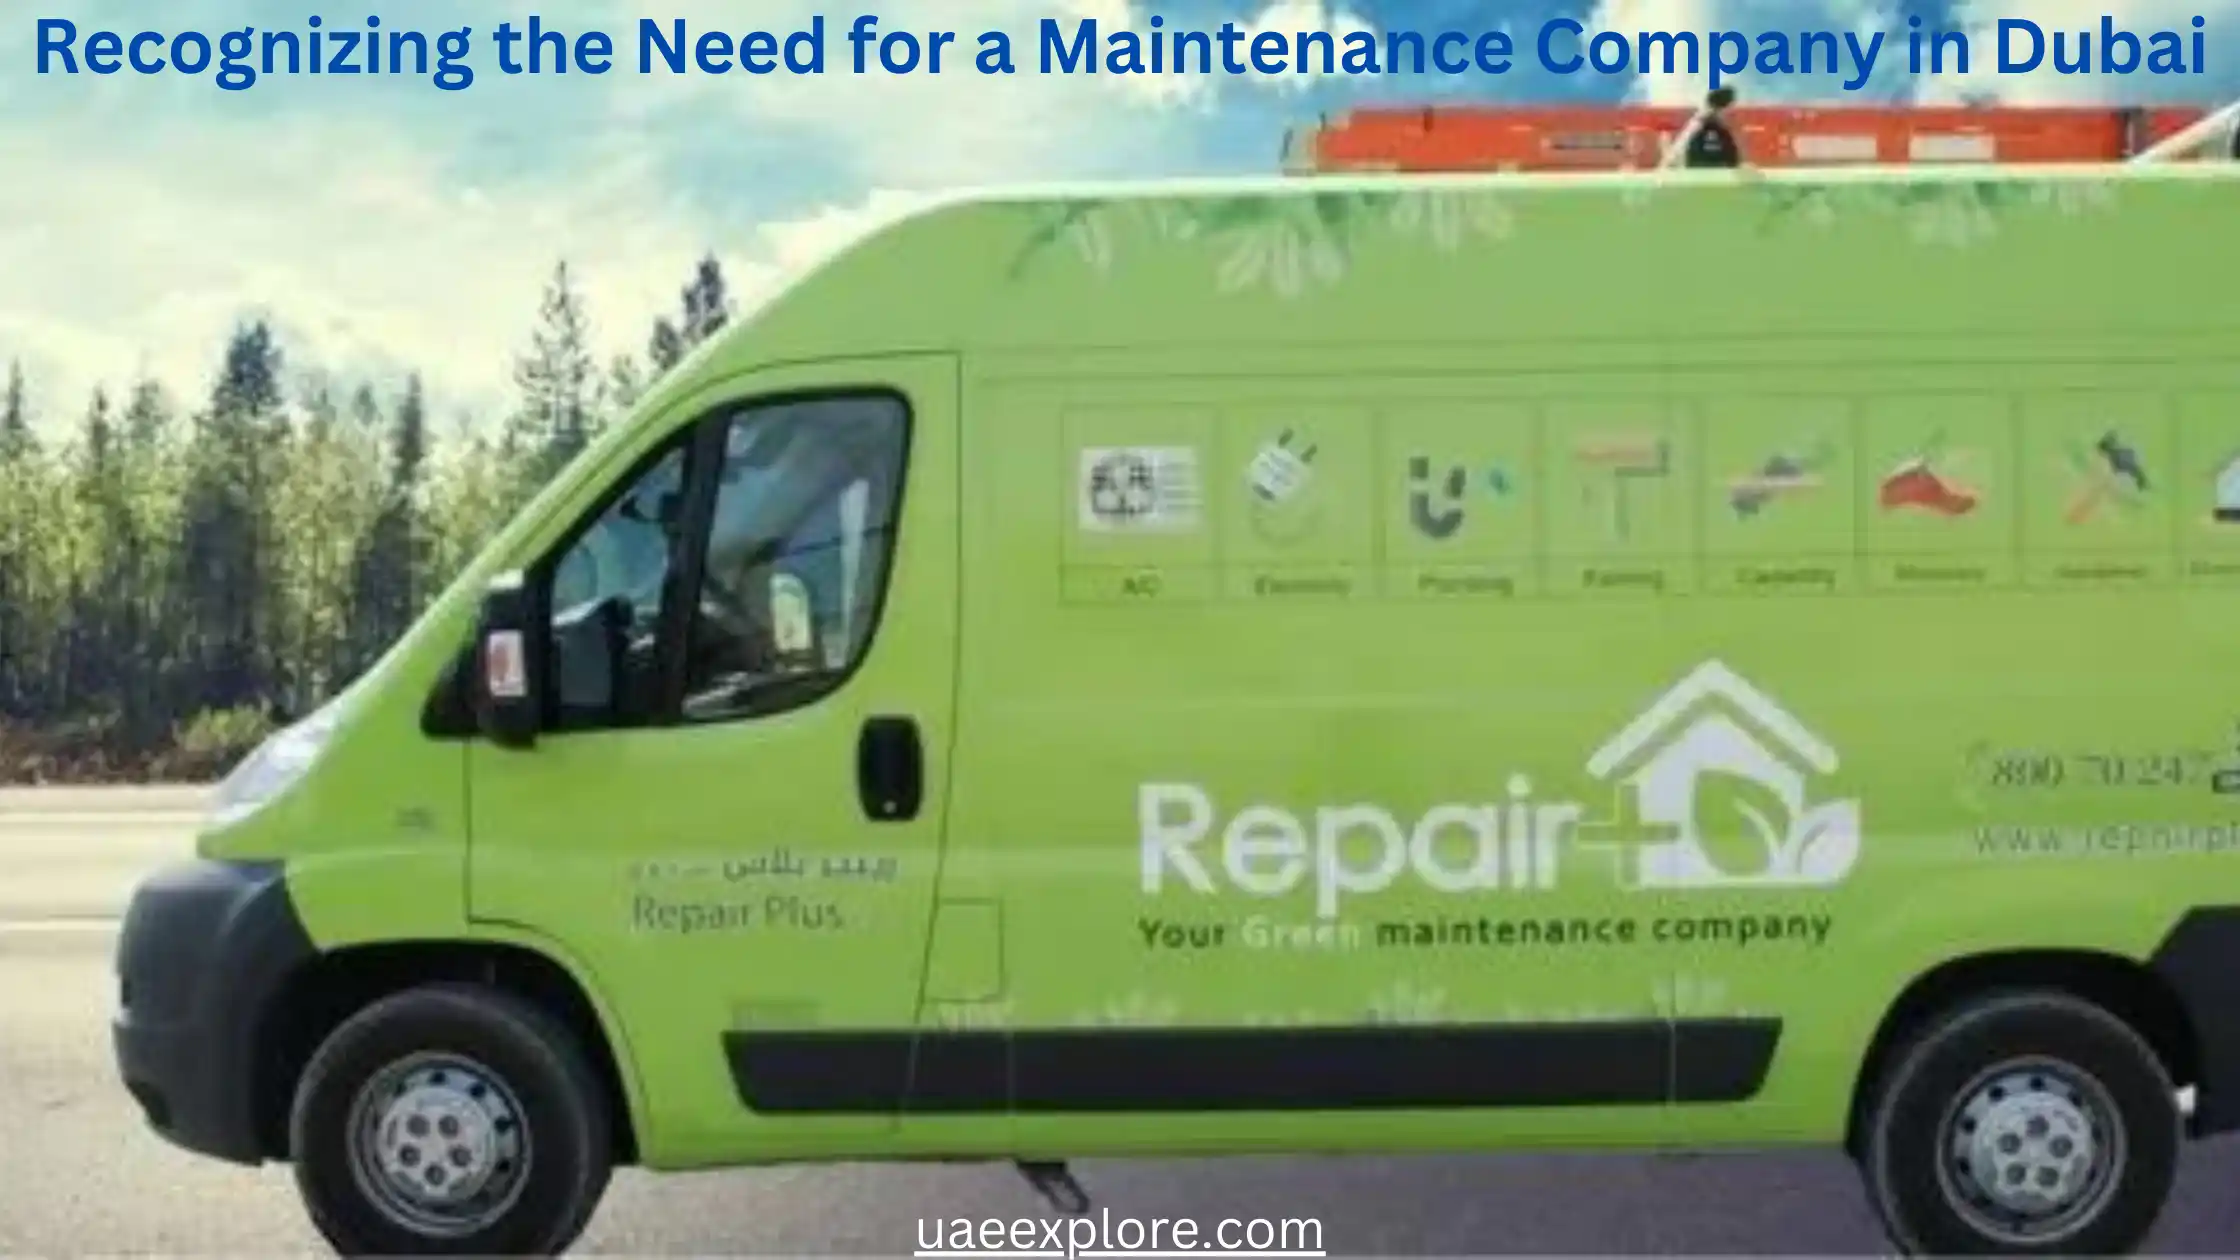 Recognizing the Need for a Maintenance Company in Dubai